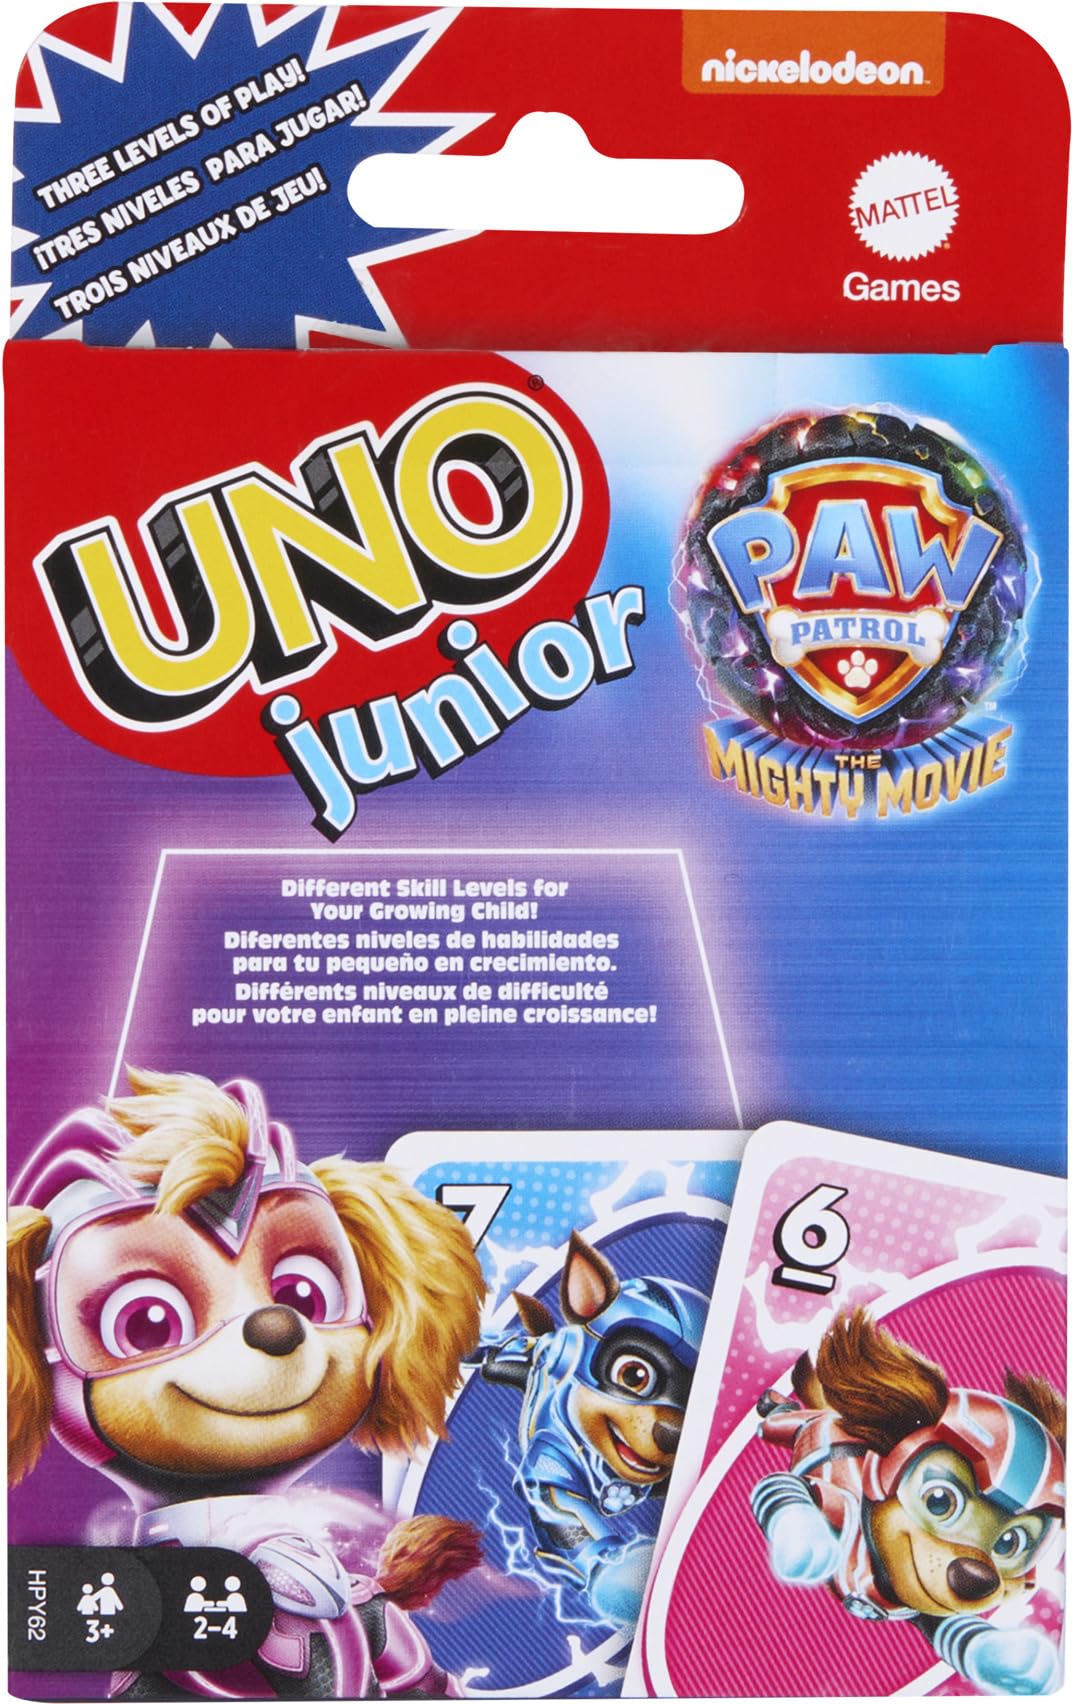 UNO Junior Paw Patrol: The Mighty Movie Kids Card Game for Family Night Featuring 3 Levels of Play